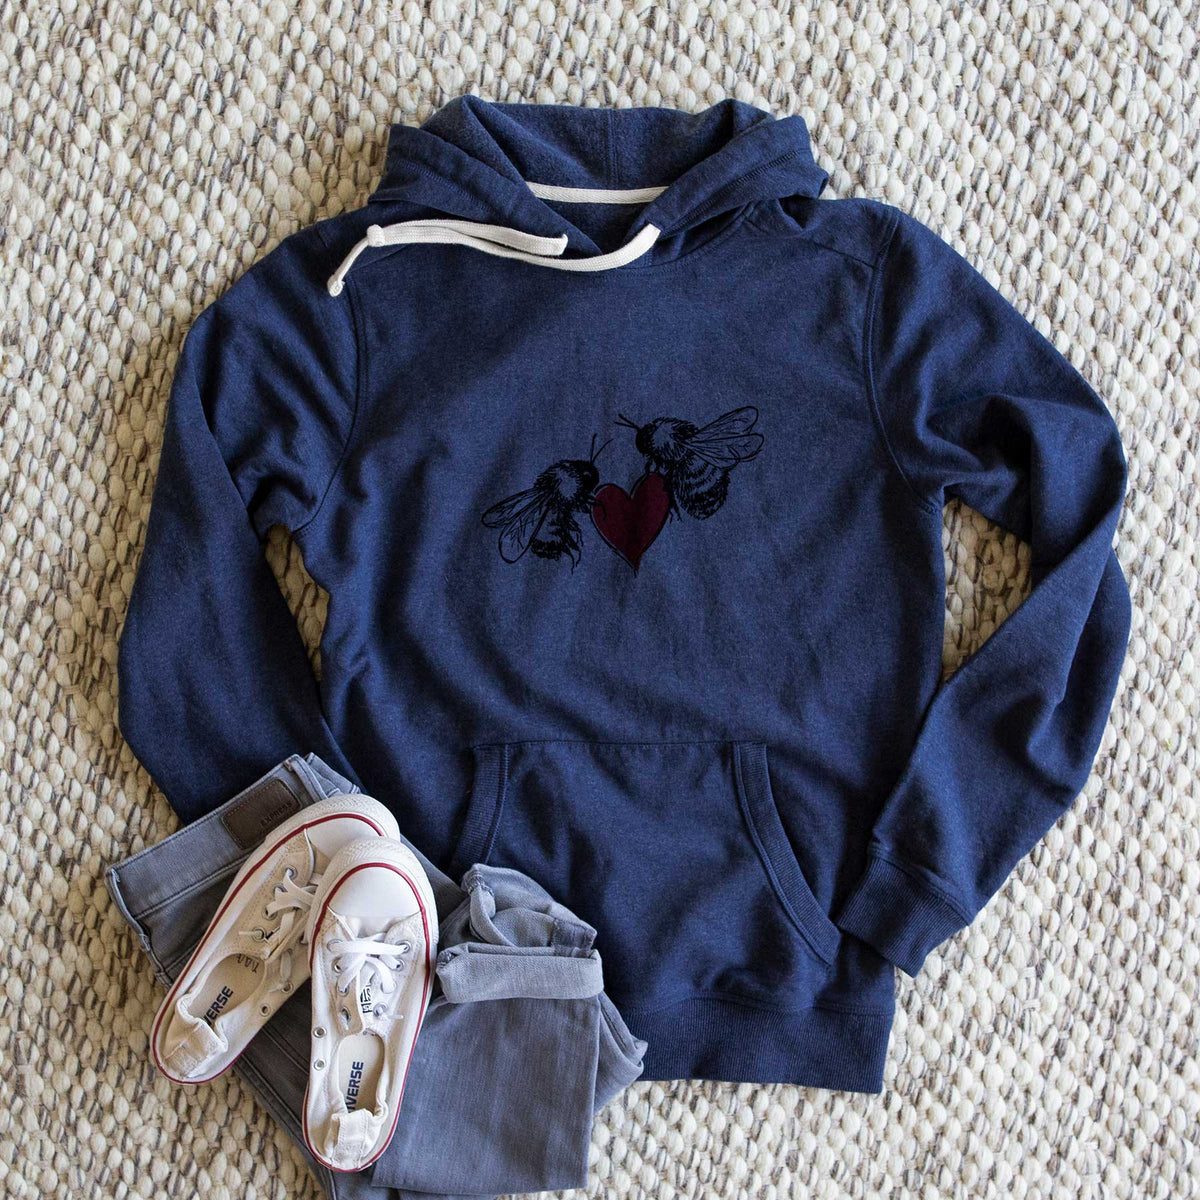 Love Bees - Unisex Recycled Hoodie - CLOSEOUT - FINAL SALE